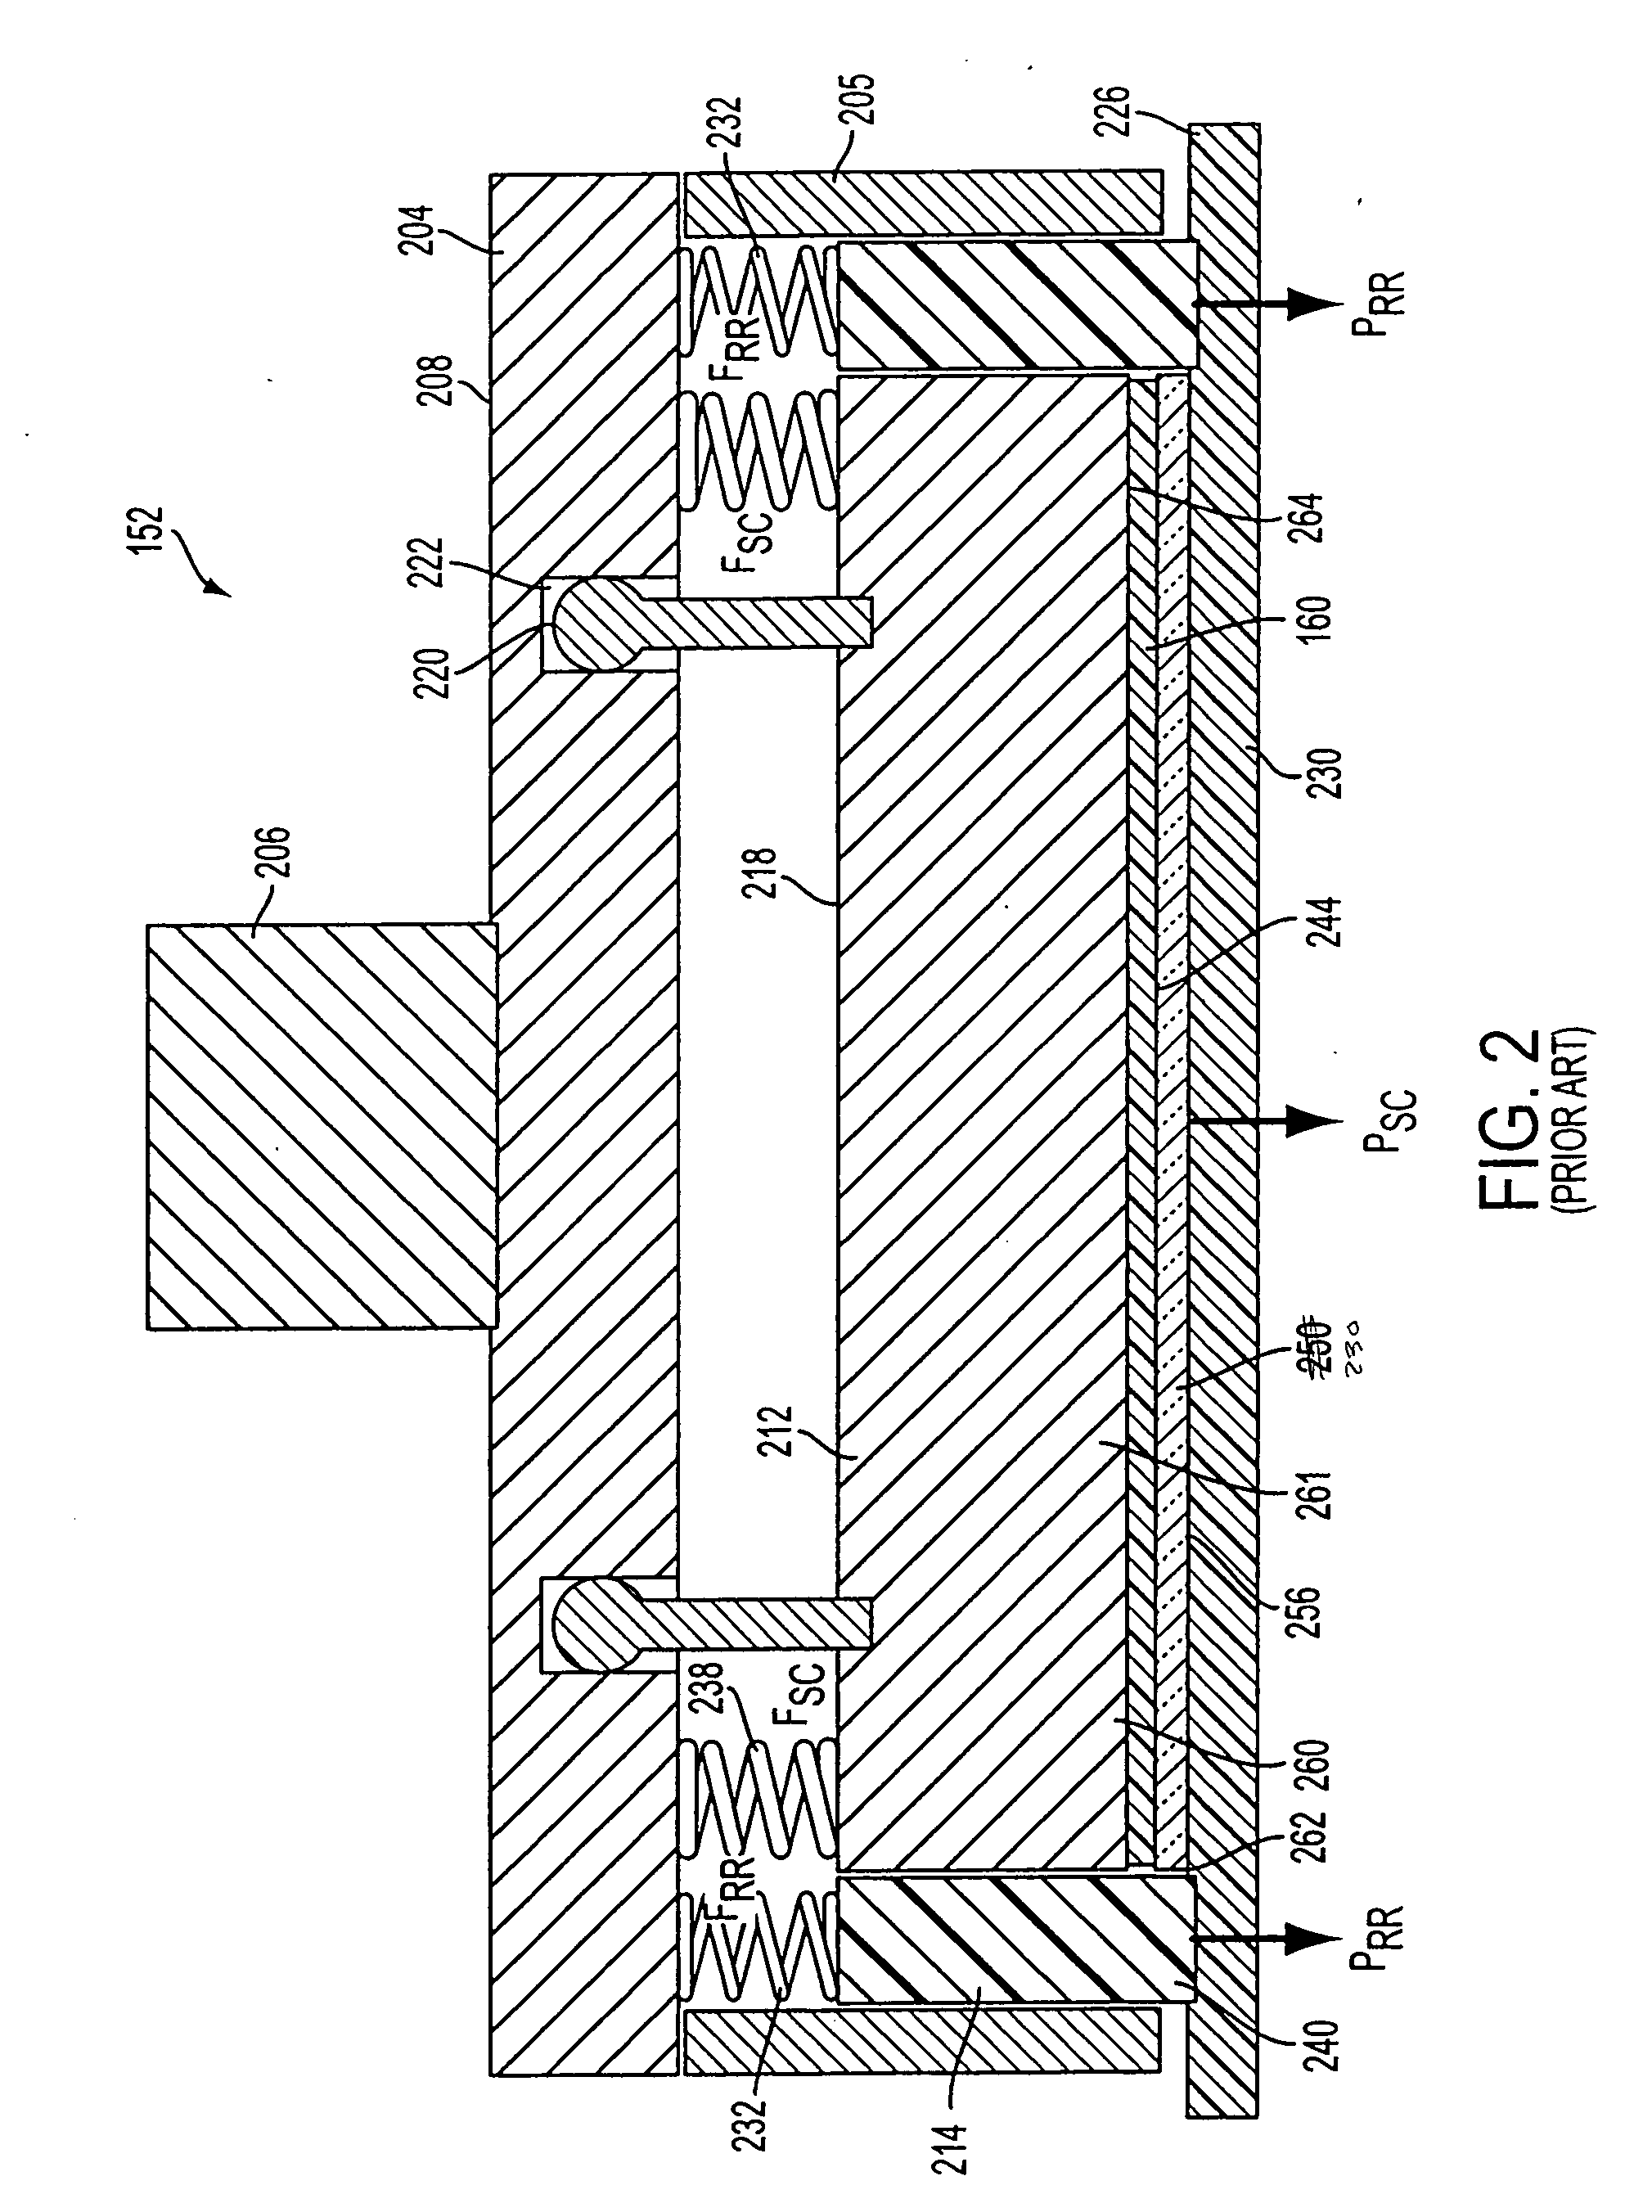 System and method for CMP having multi-pressure zone loading for improved edge and annular zone material removal control